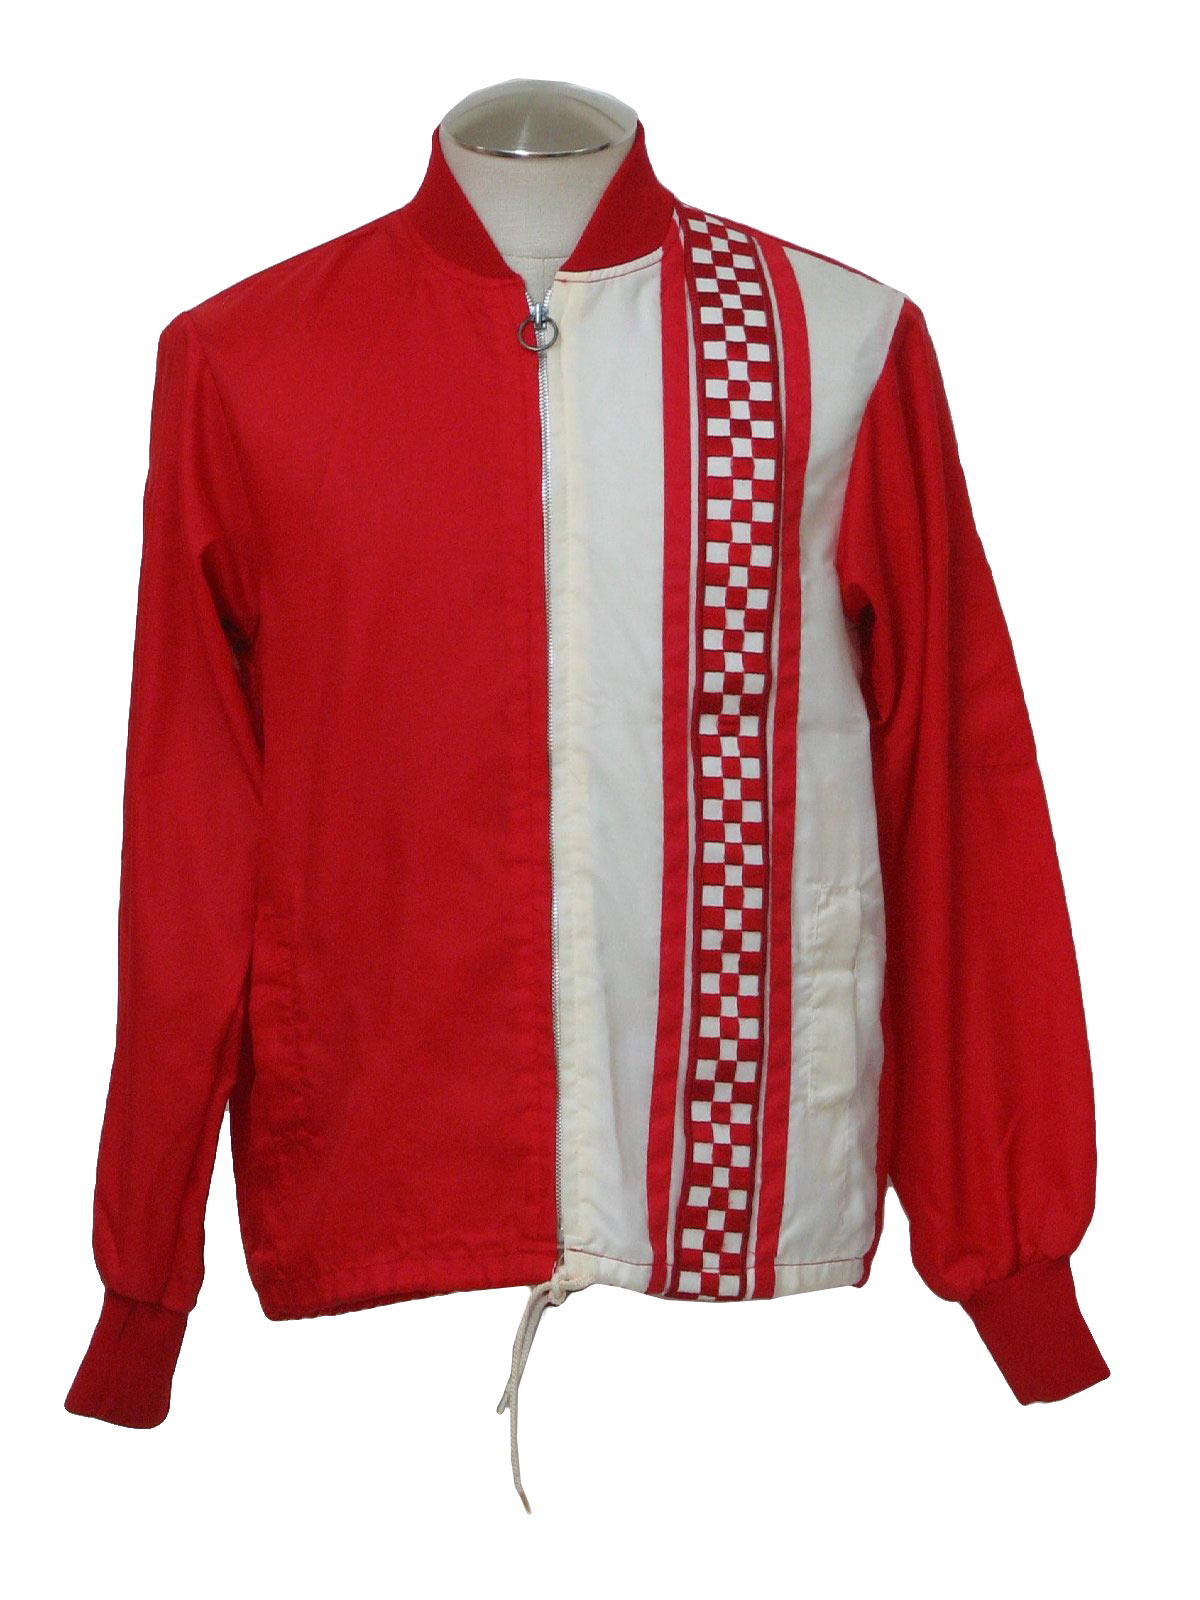 Seventies Vintage Jacket: 70s -no label- Mens red and white nylon ...